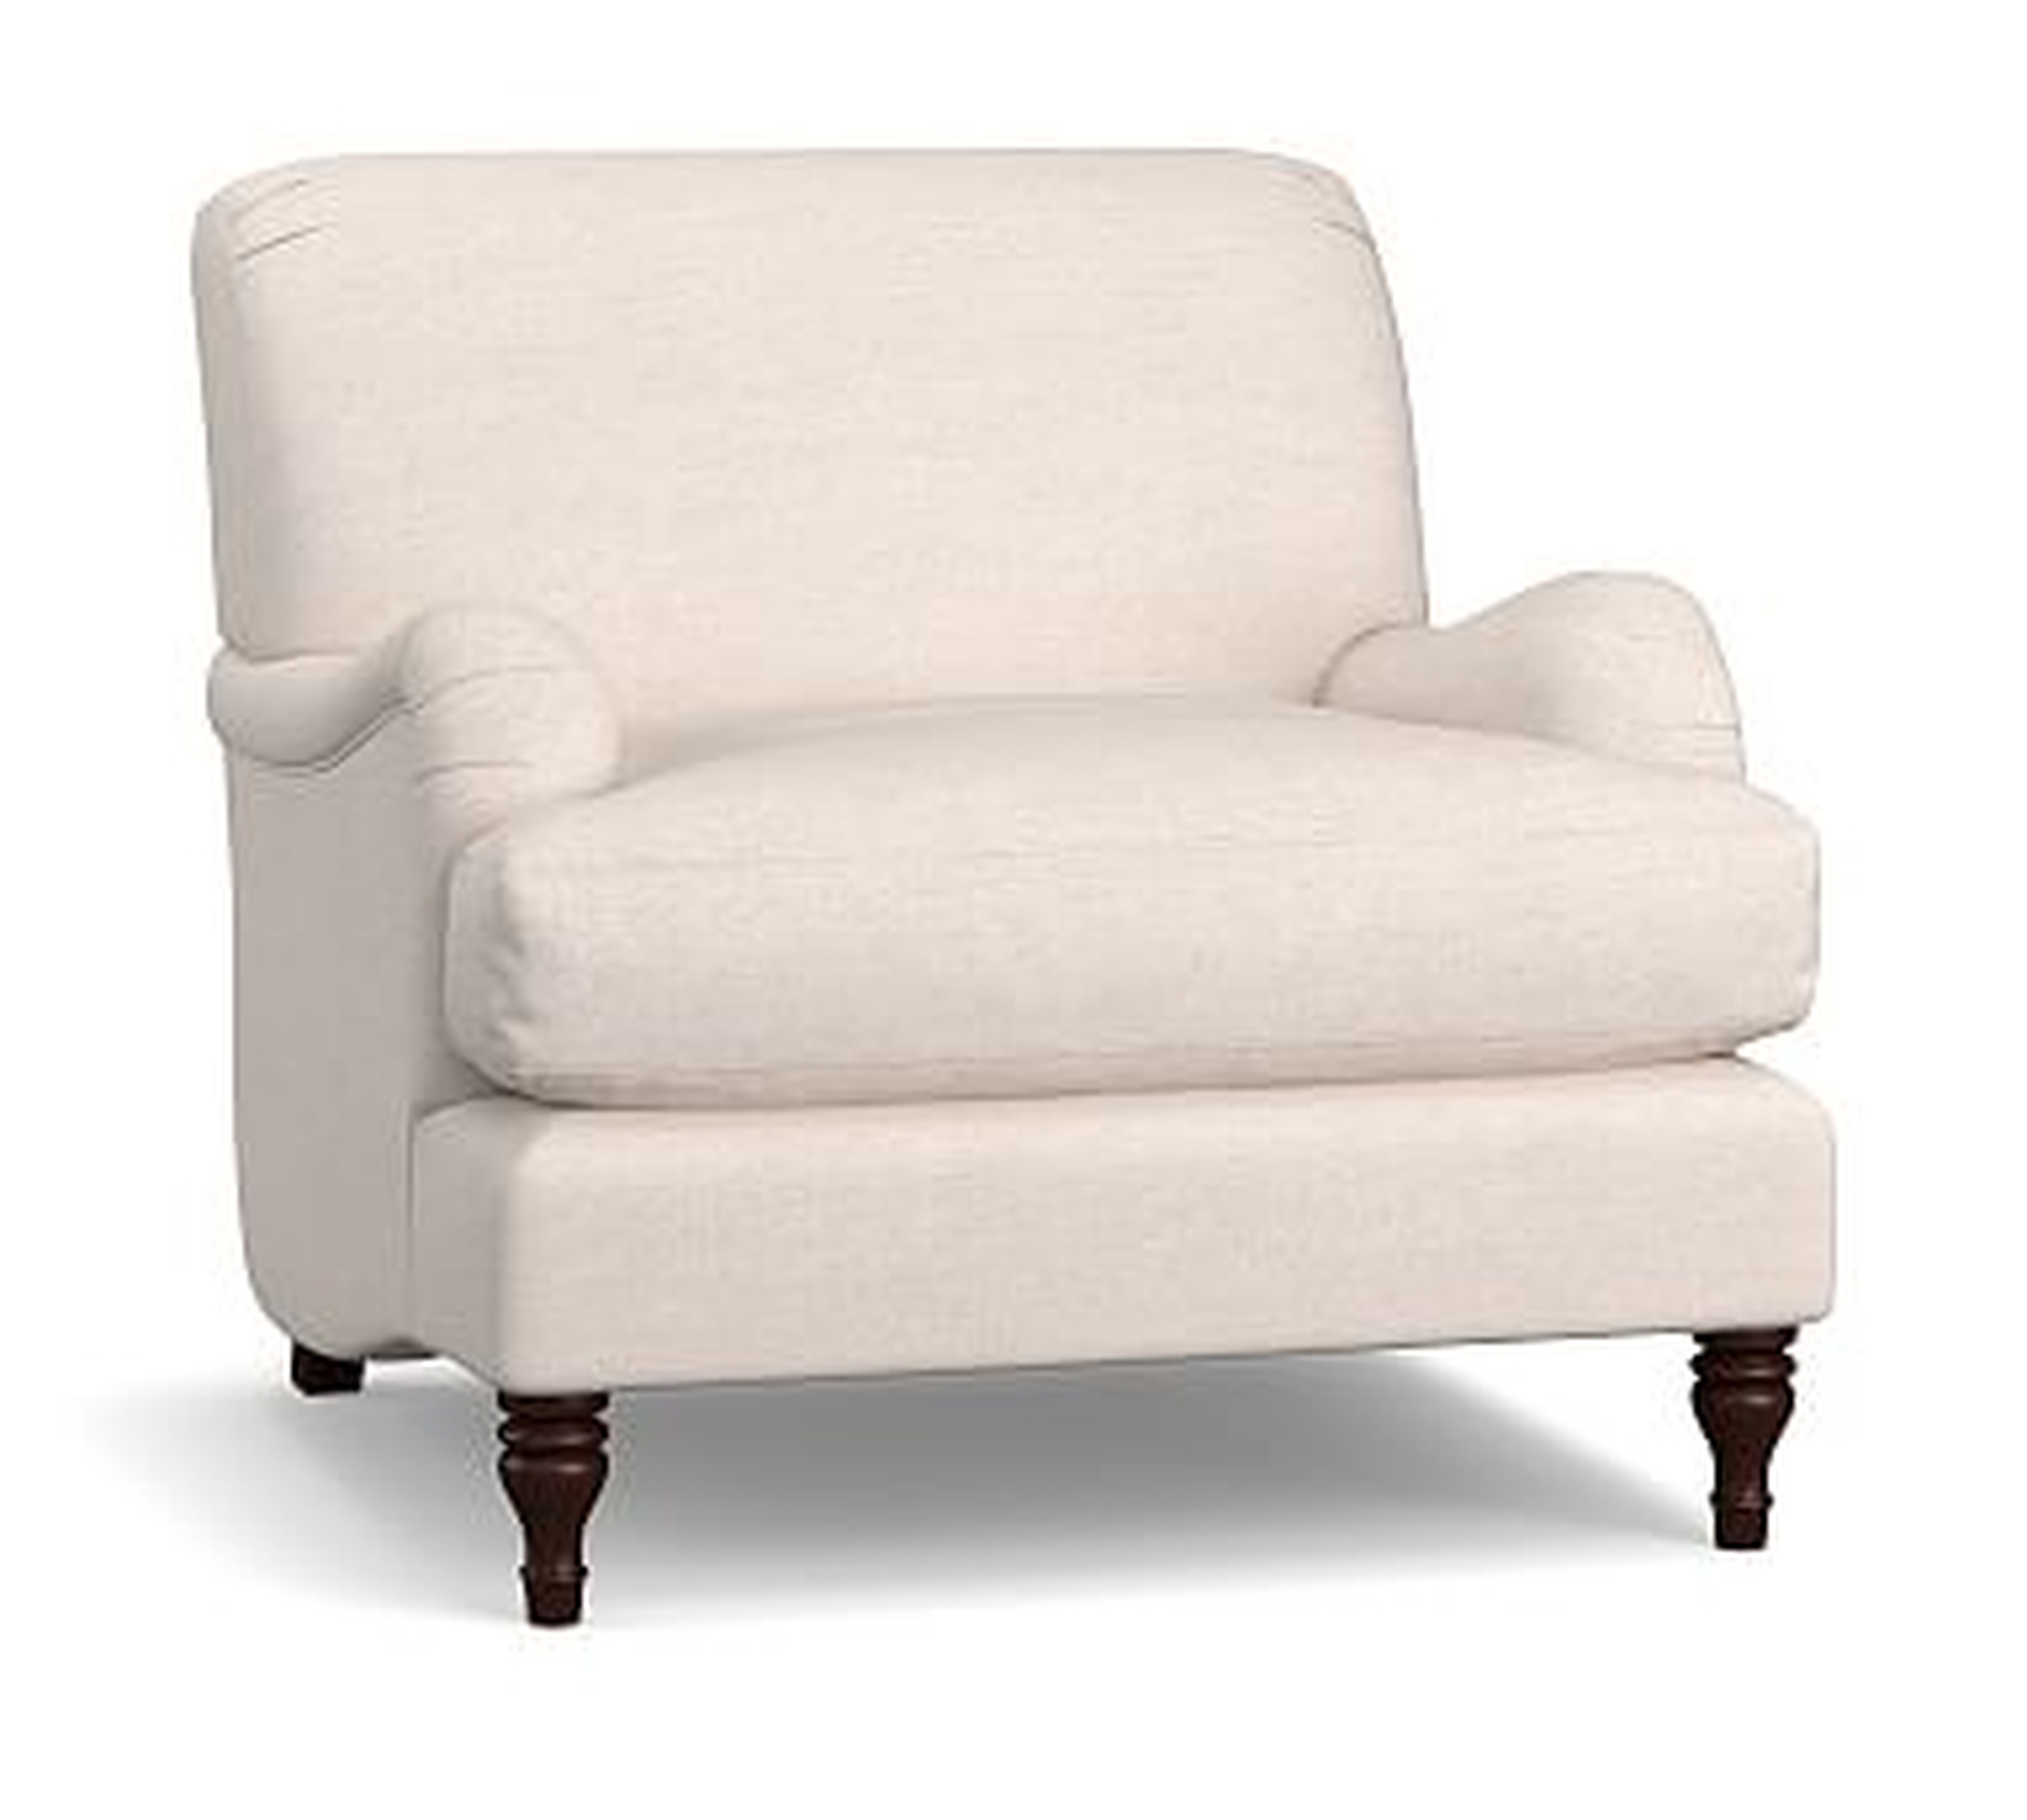 Carlisle English Arm Upholstered Tightback Armchair, Polyester Wrapped Cushions, Twill White - Pottery Barn